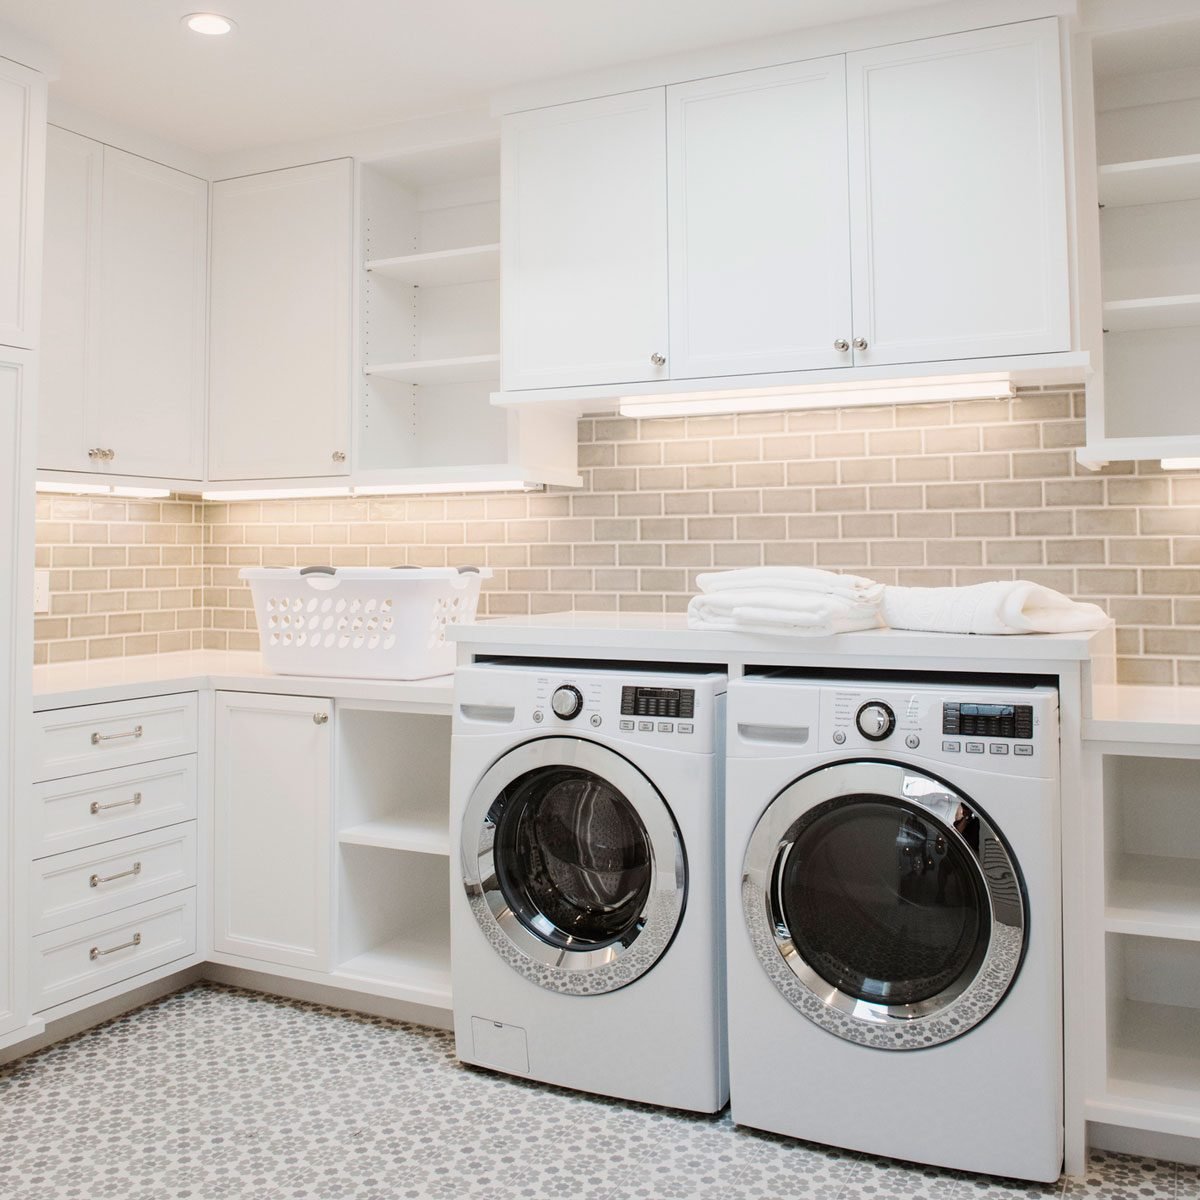 25 Laundry Room Ideas You Can Diy, How To Remove Laundry Room Cabinets